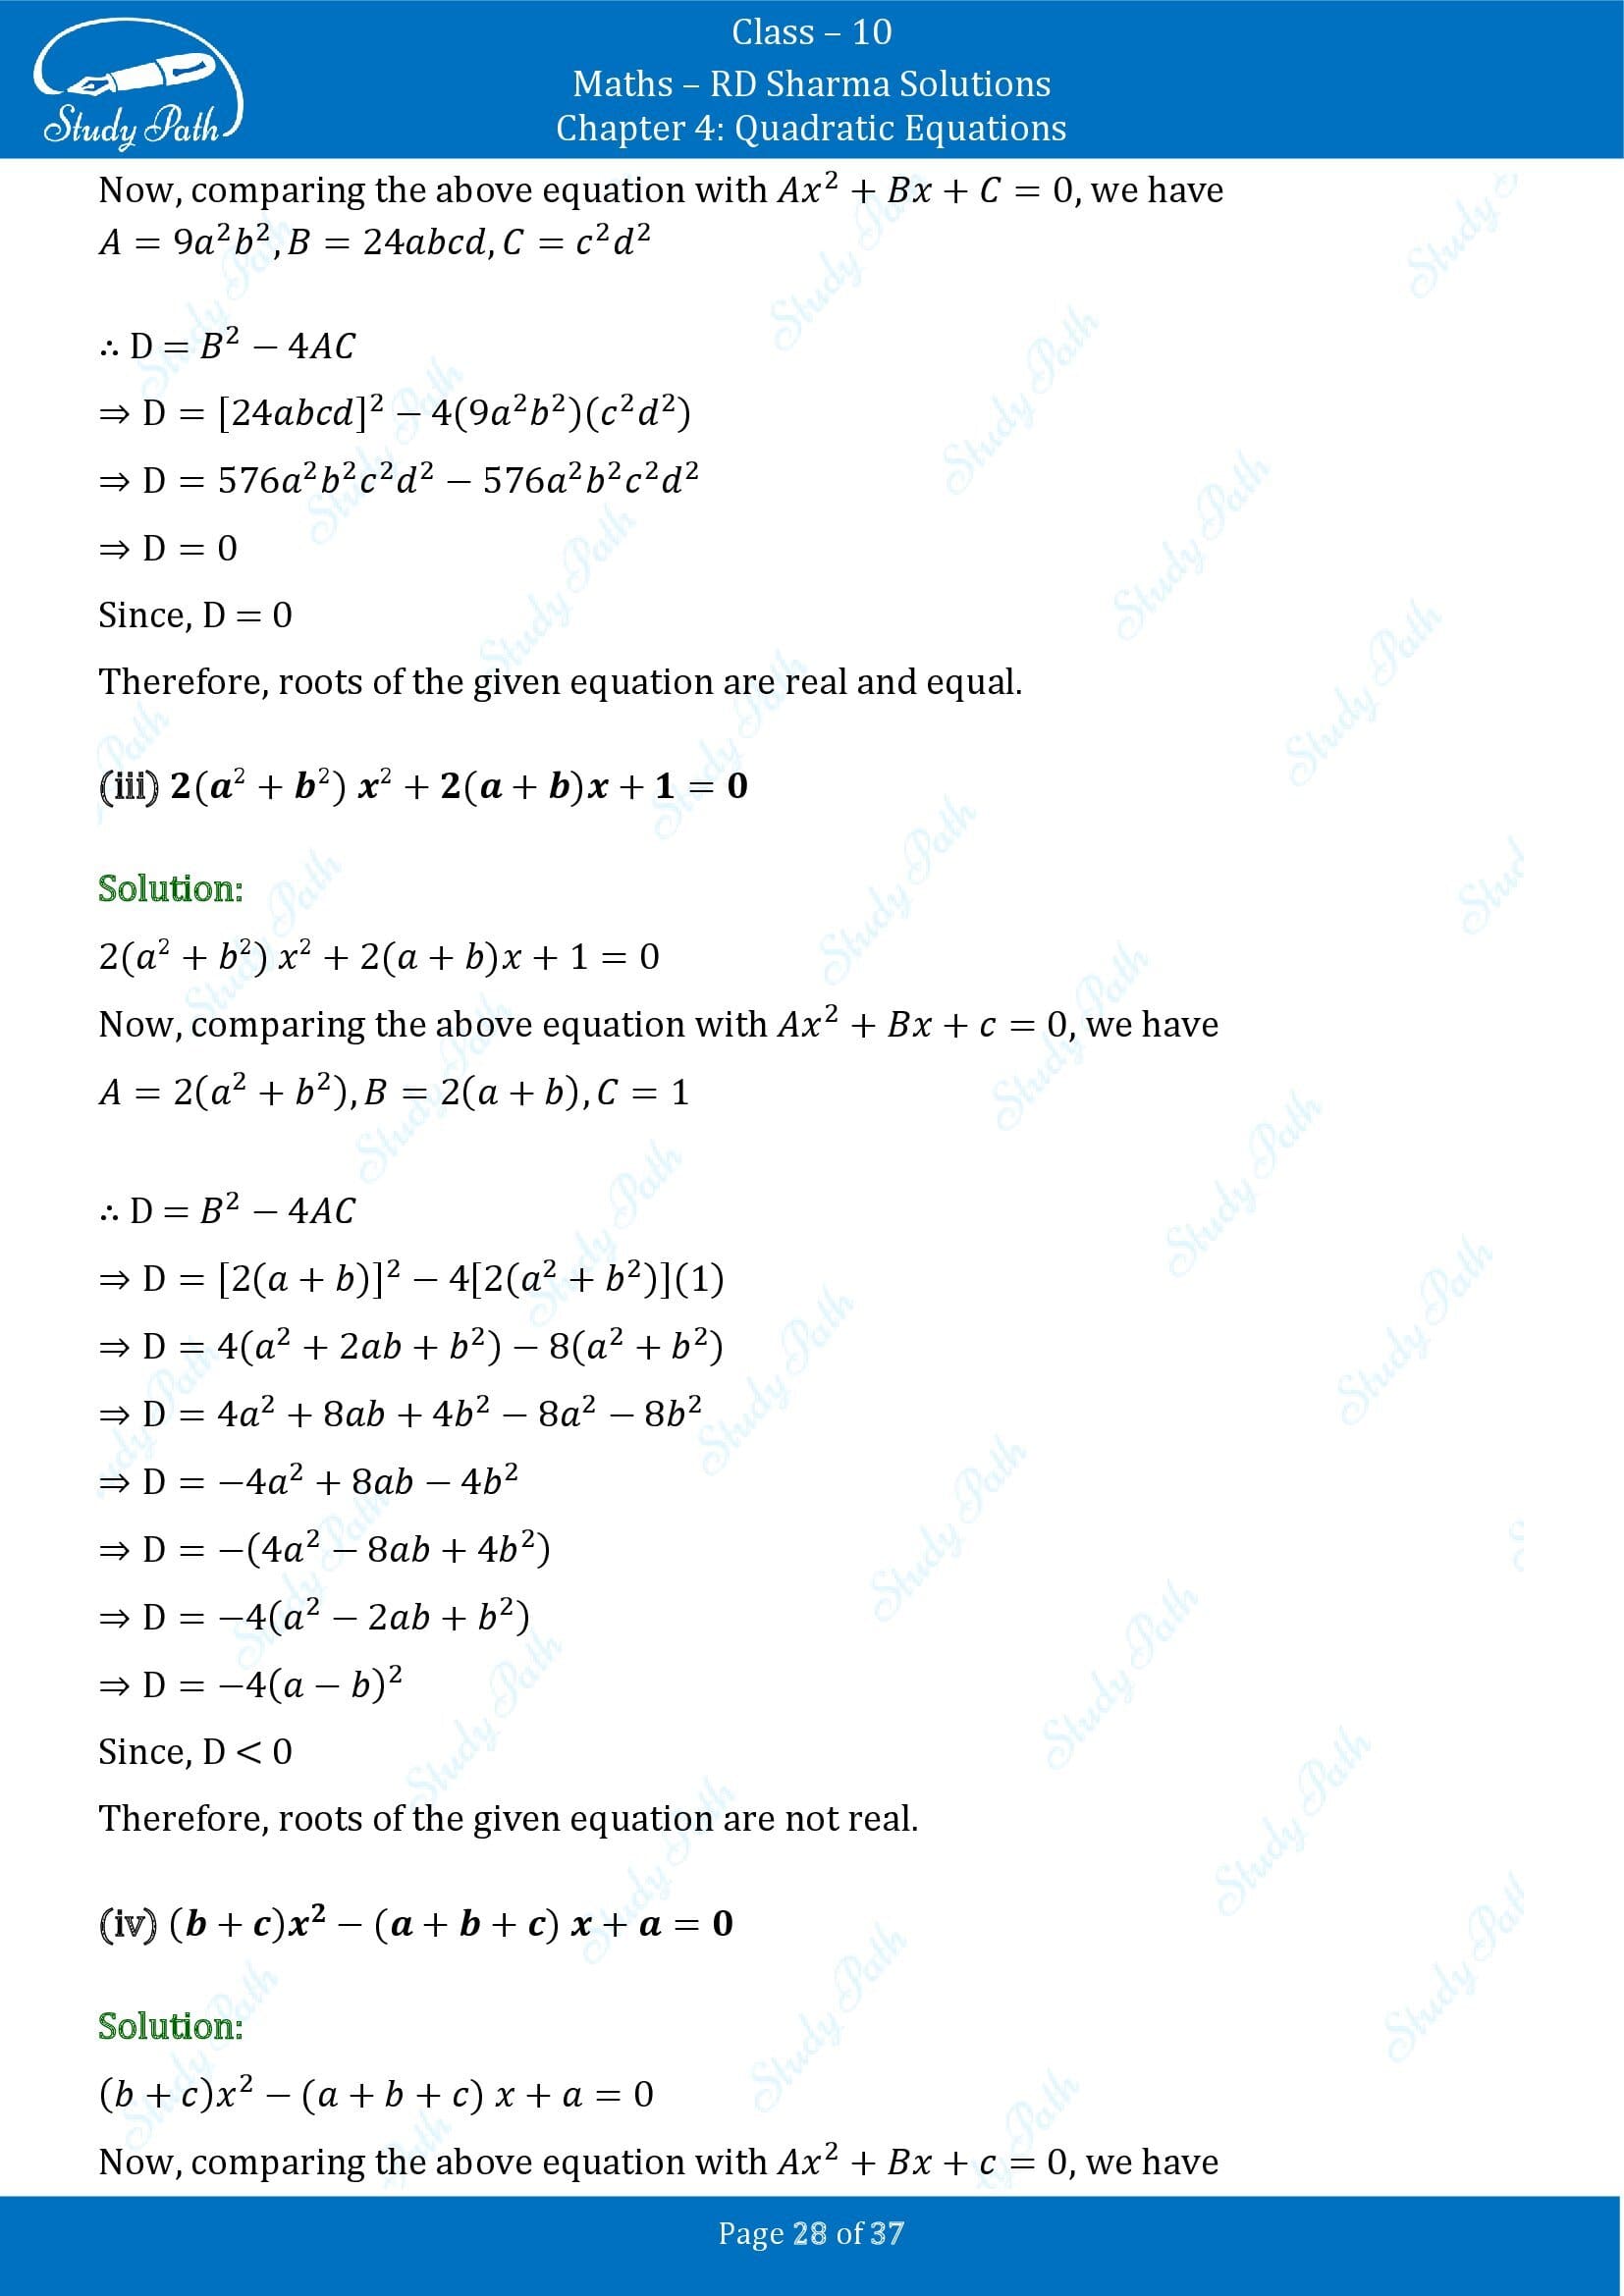 RD Sharma Solutions Class 10 Chapter 4 Quadratic Equations Exercise 4.6 00028